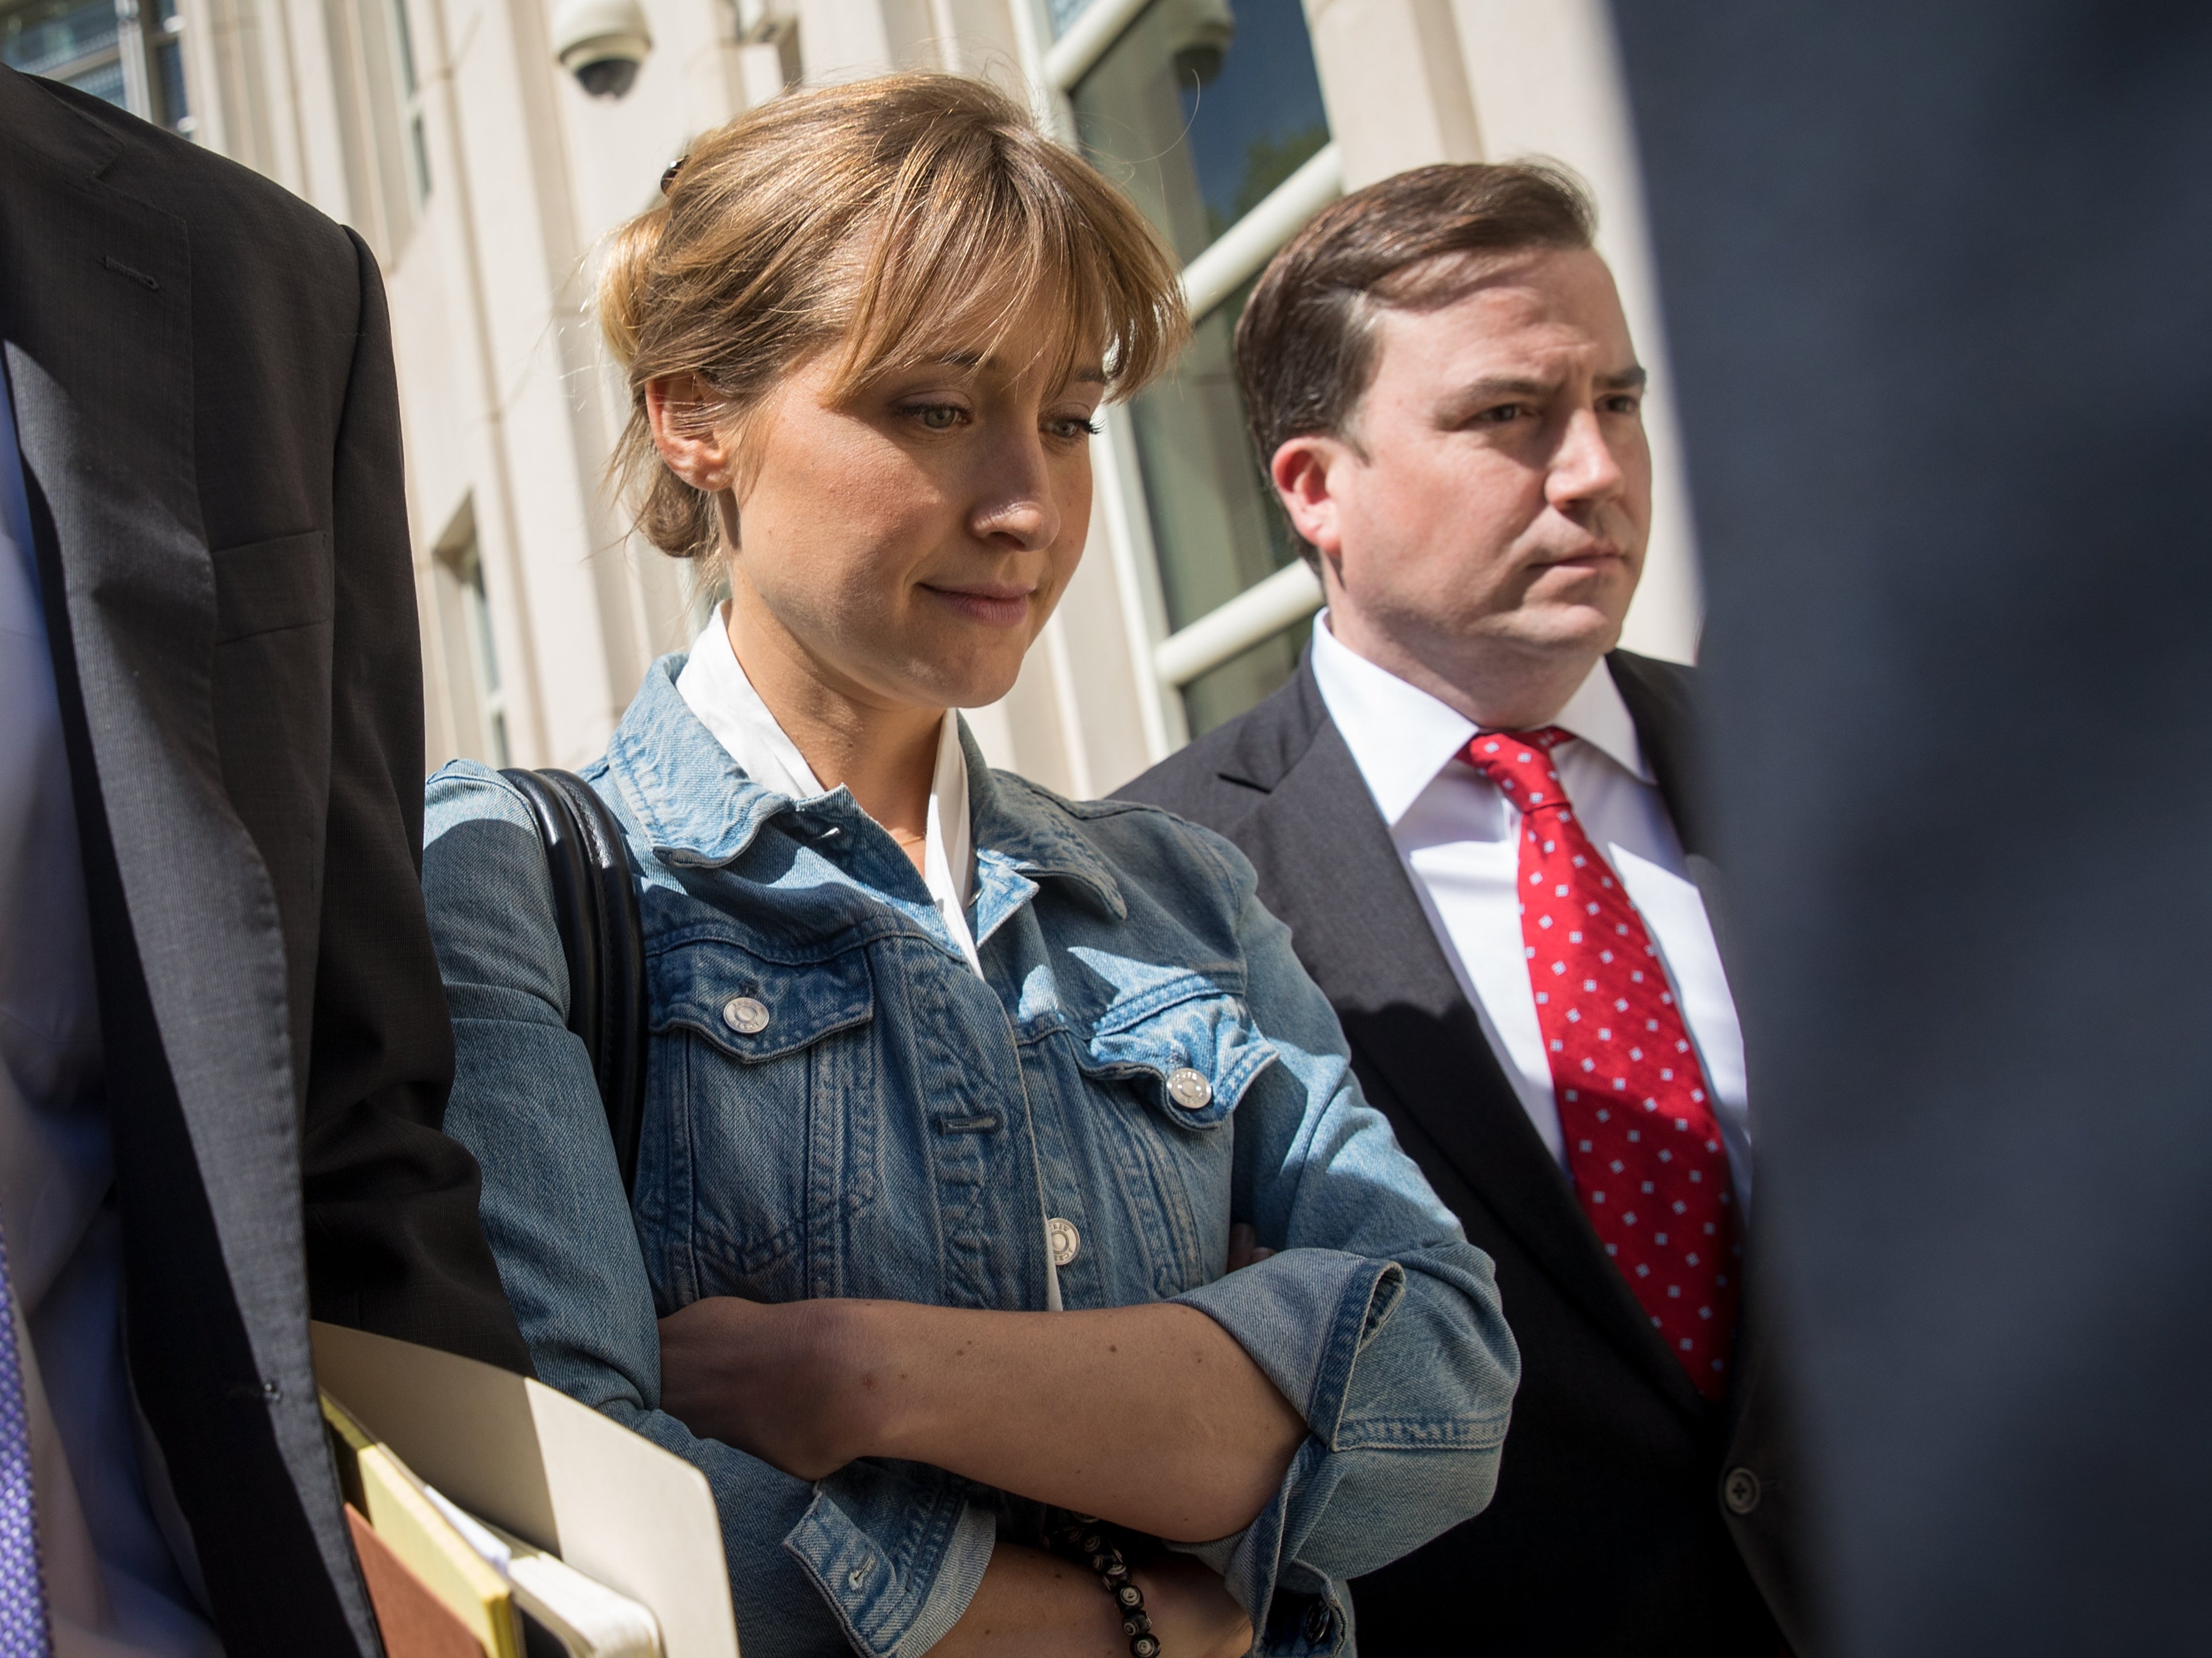 Allison Mack exits the US District Court for the Eastern District of New York following a status conference on 12 June 2018 in the Brooklyn borough of New York City